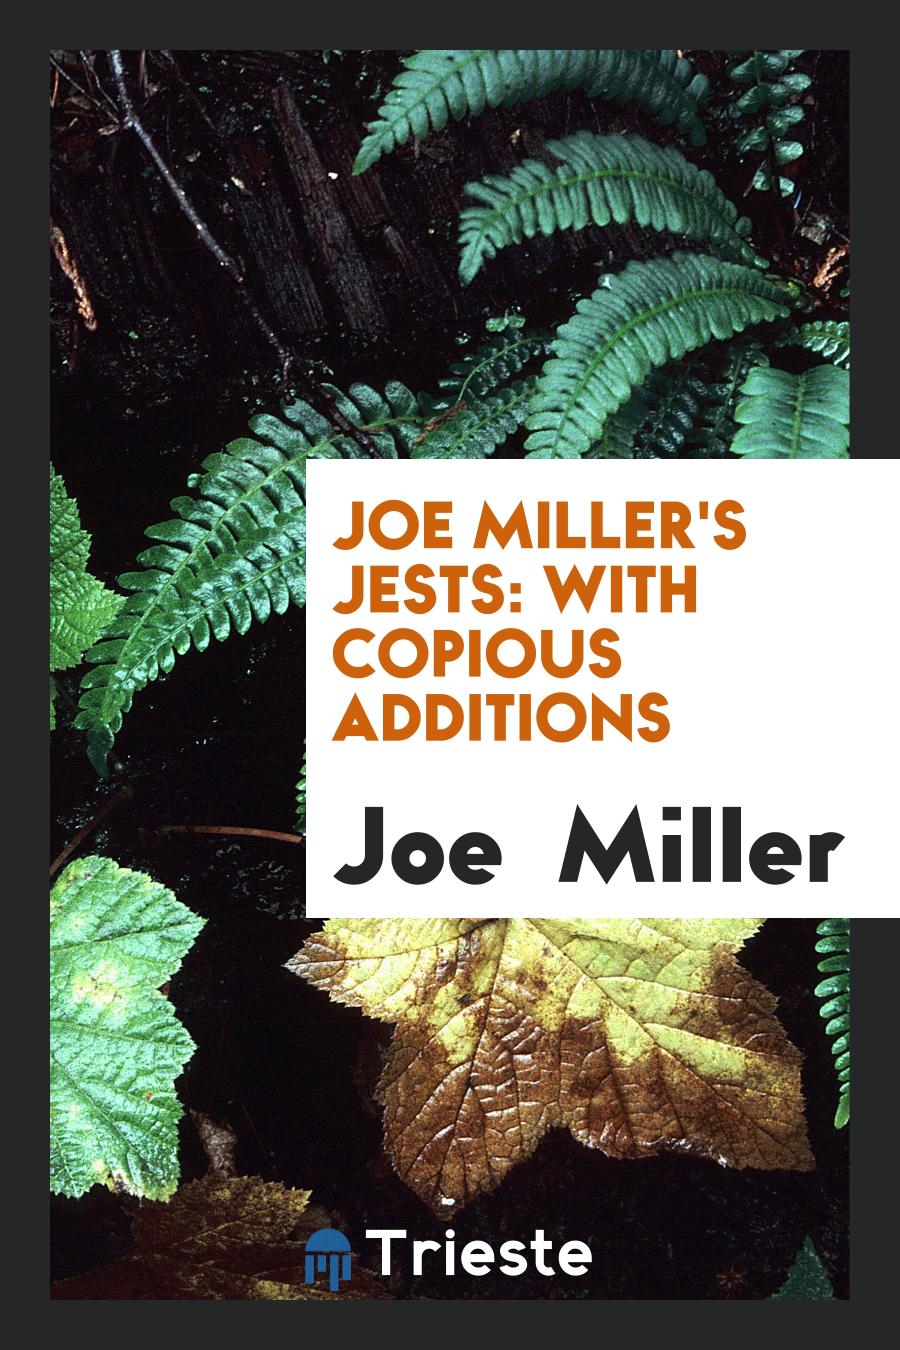 Joe Miller's Jests: With Copious Additions